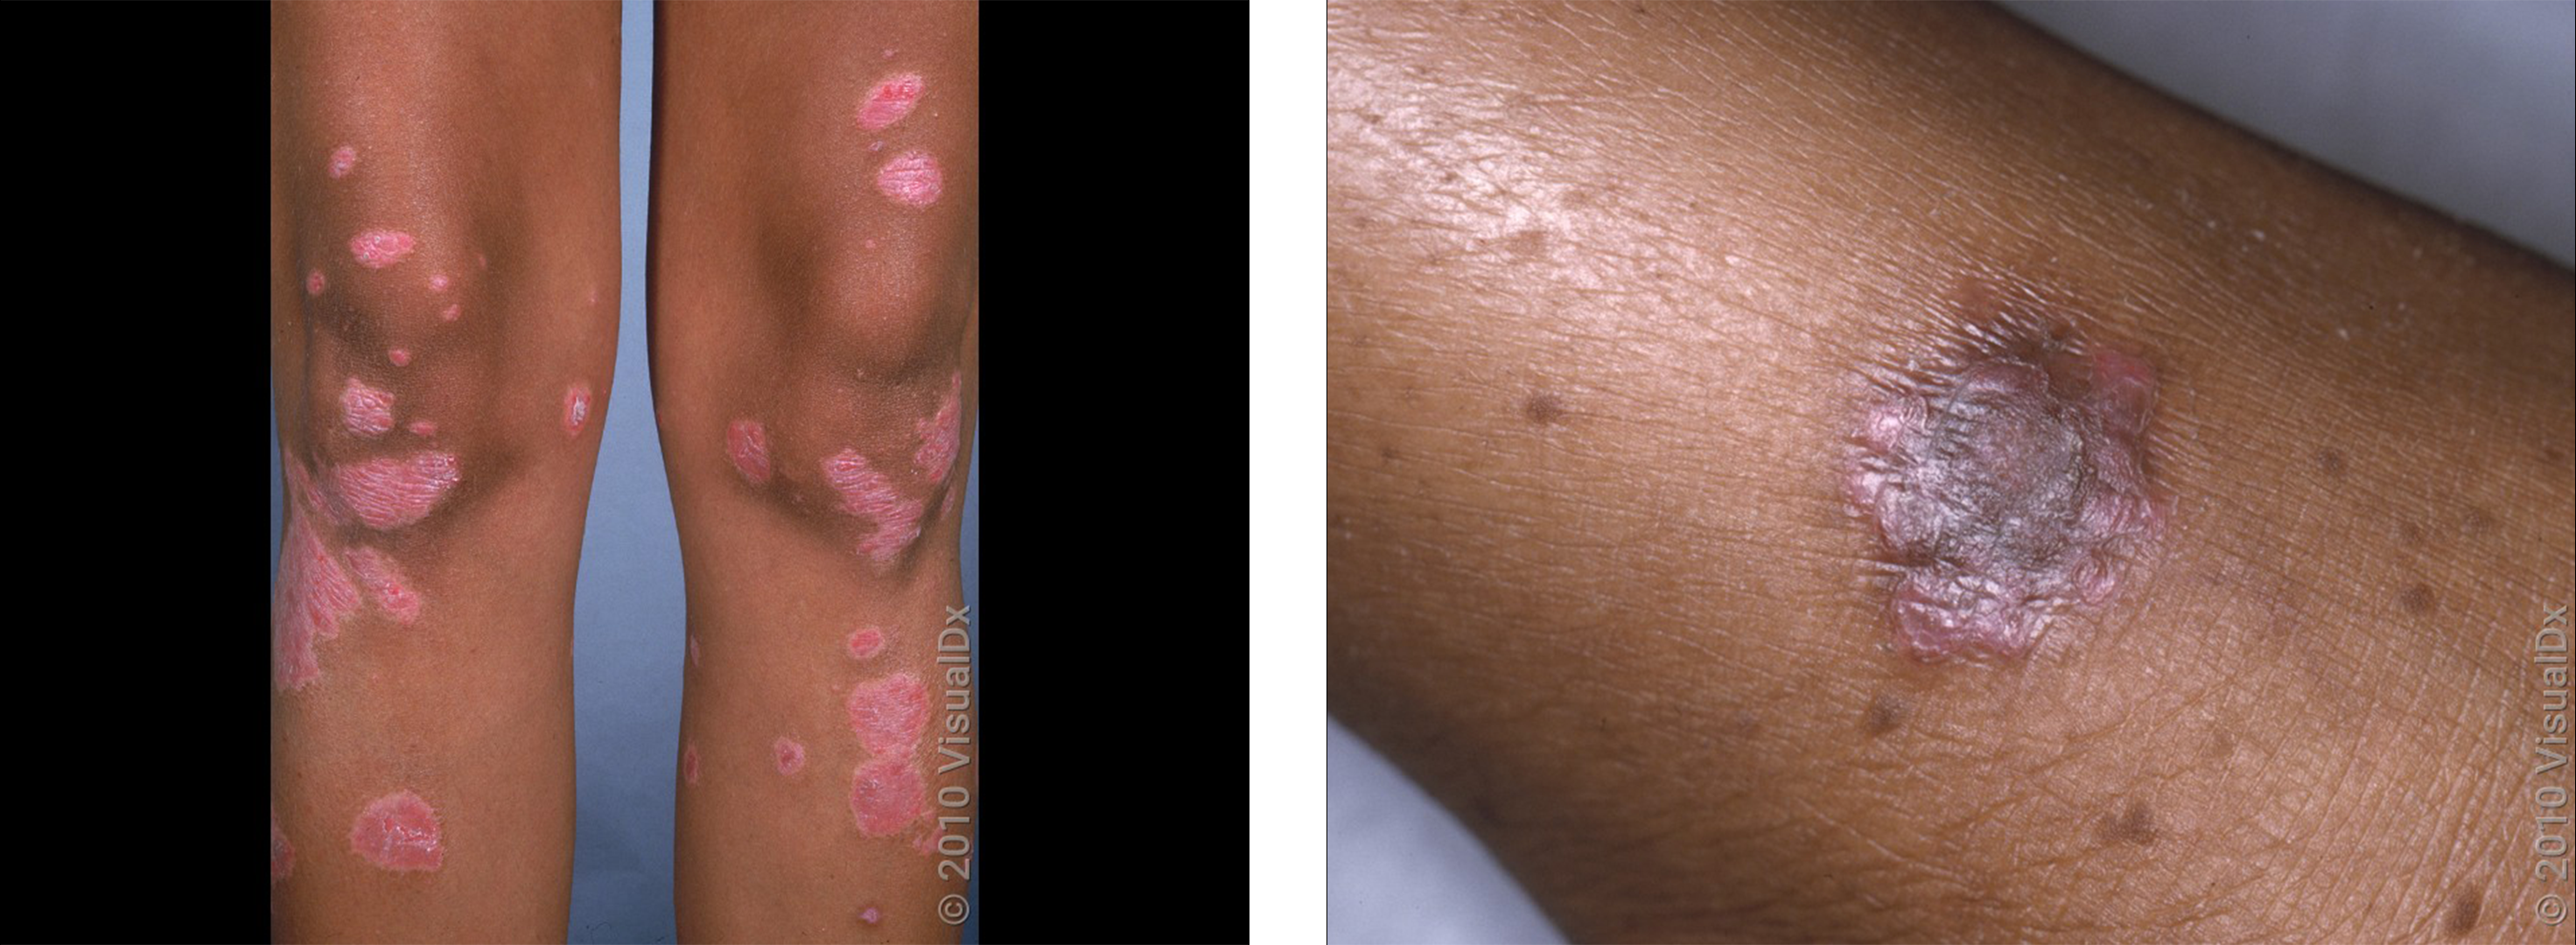 Left: Pink, round patches on the legs in an autoimmune rash. Right: A close-up of a round, purple rash.